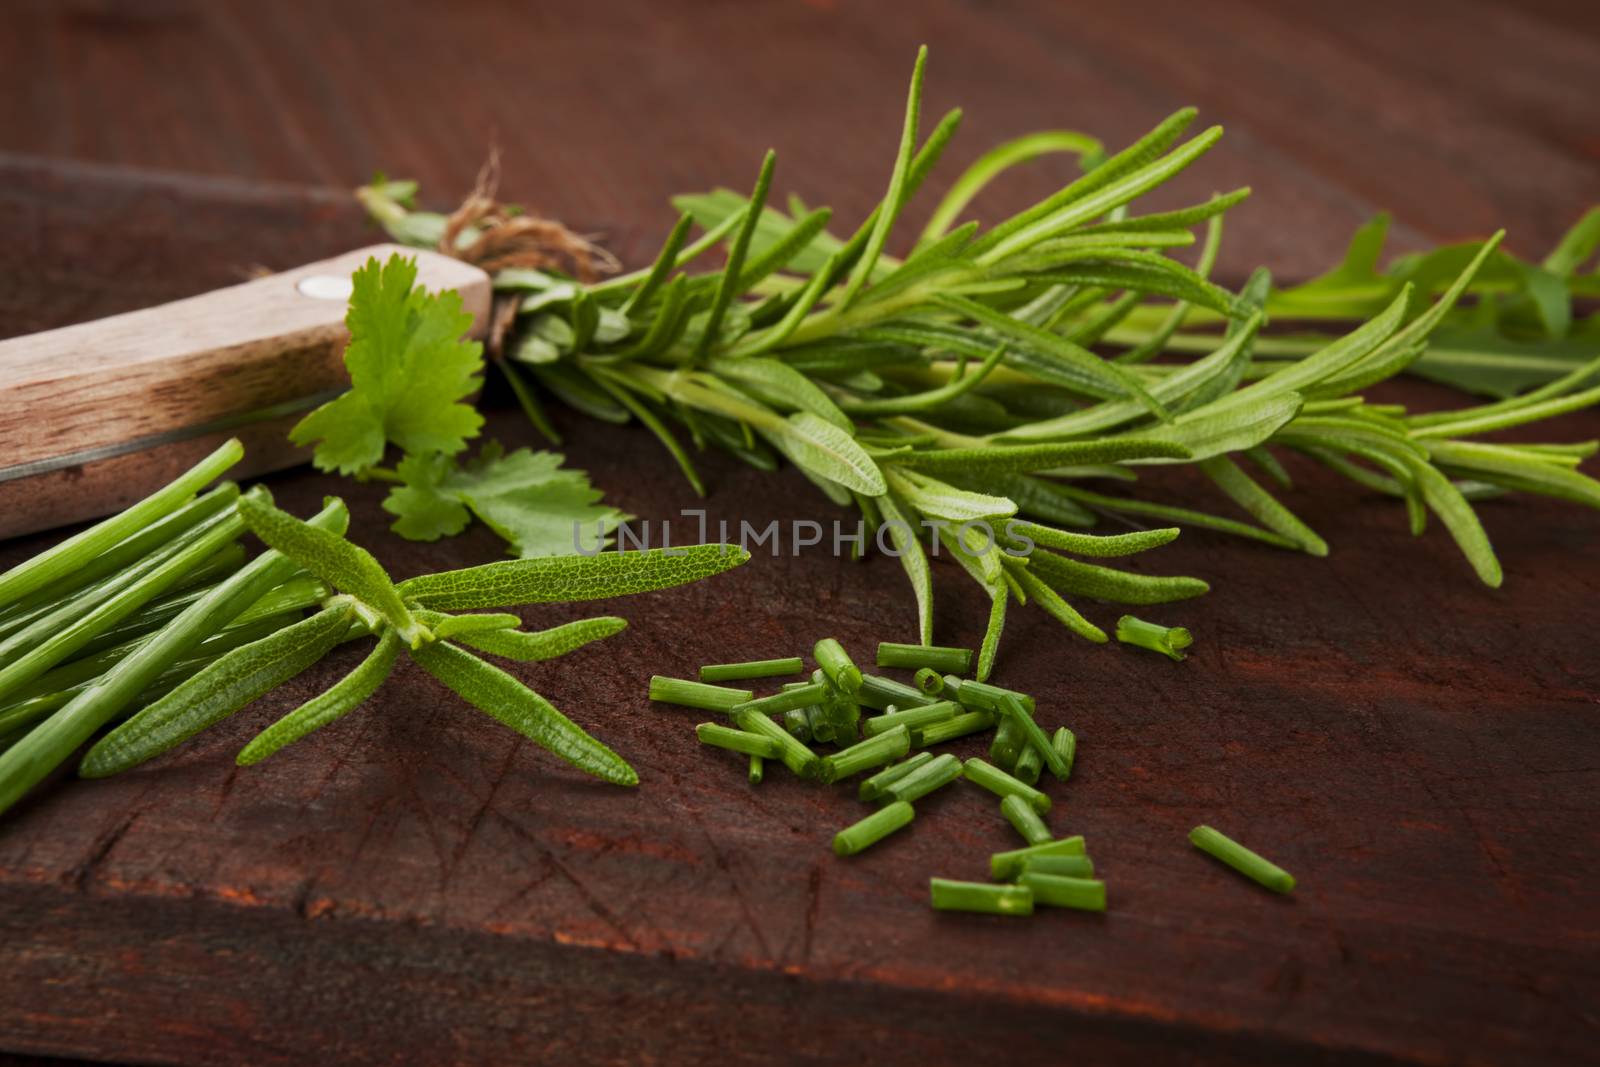 Fresh herb mixture on dark wooden cutting board. Chive, rosemary, coriander and arugula, aromatic culinary herbs.